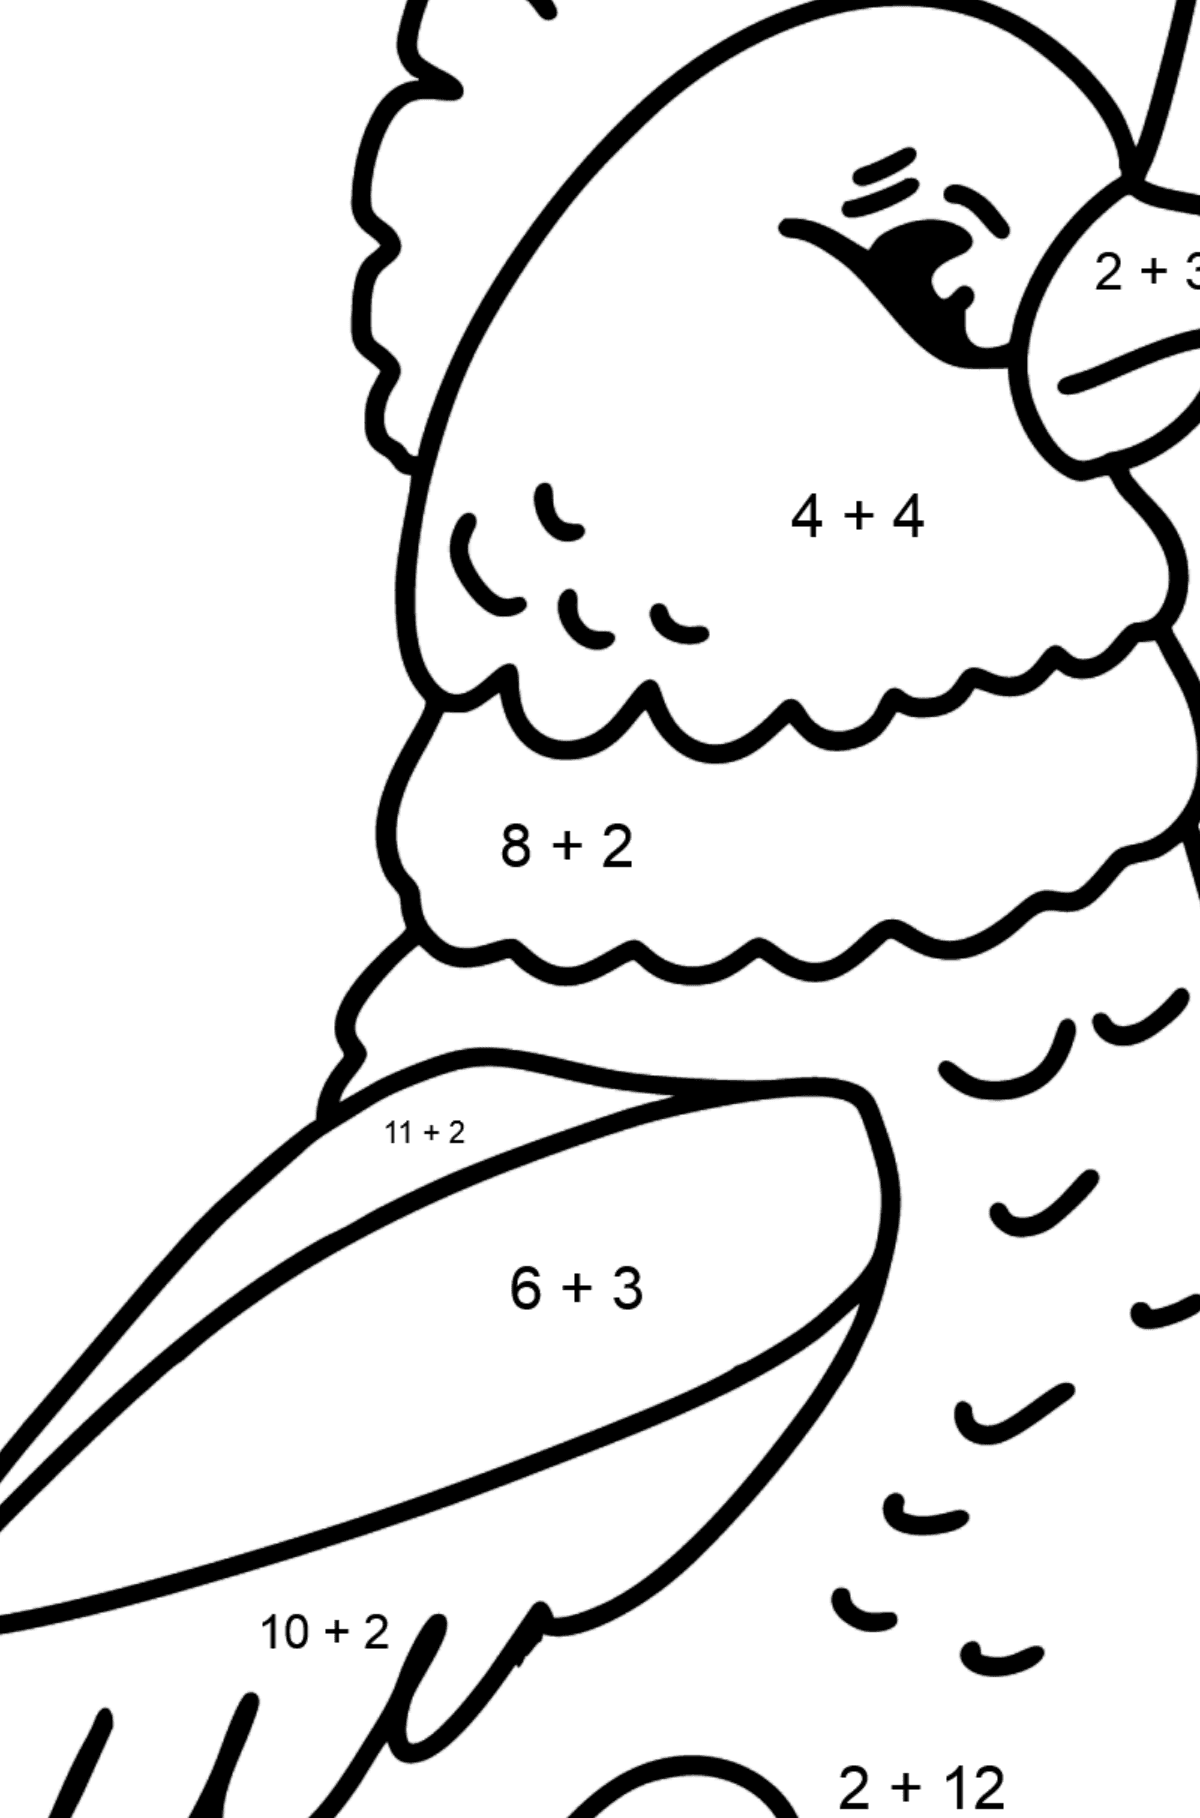 Cockatoo coloring page - Math Coloring - Addition for Kids